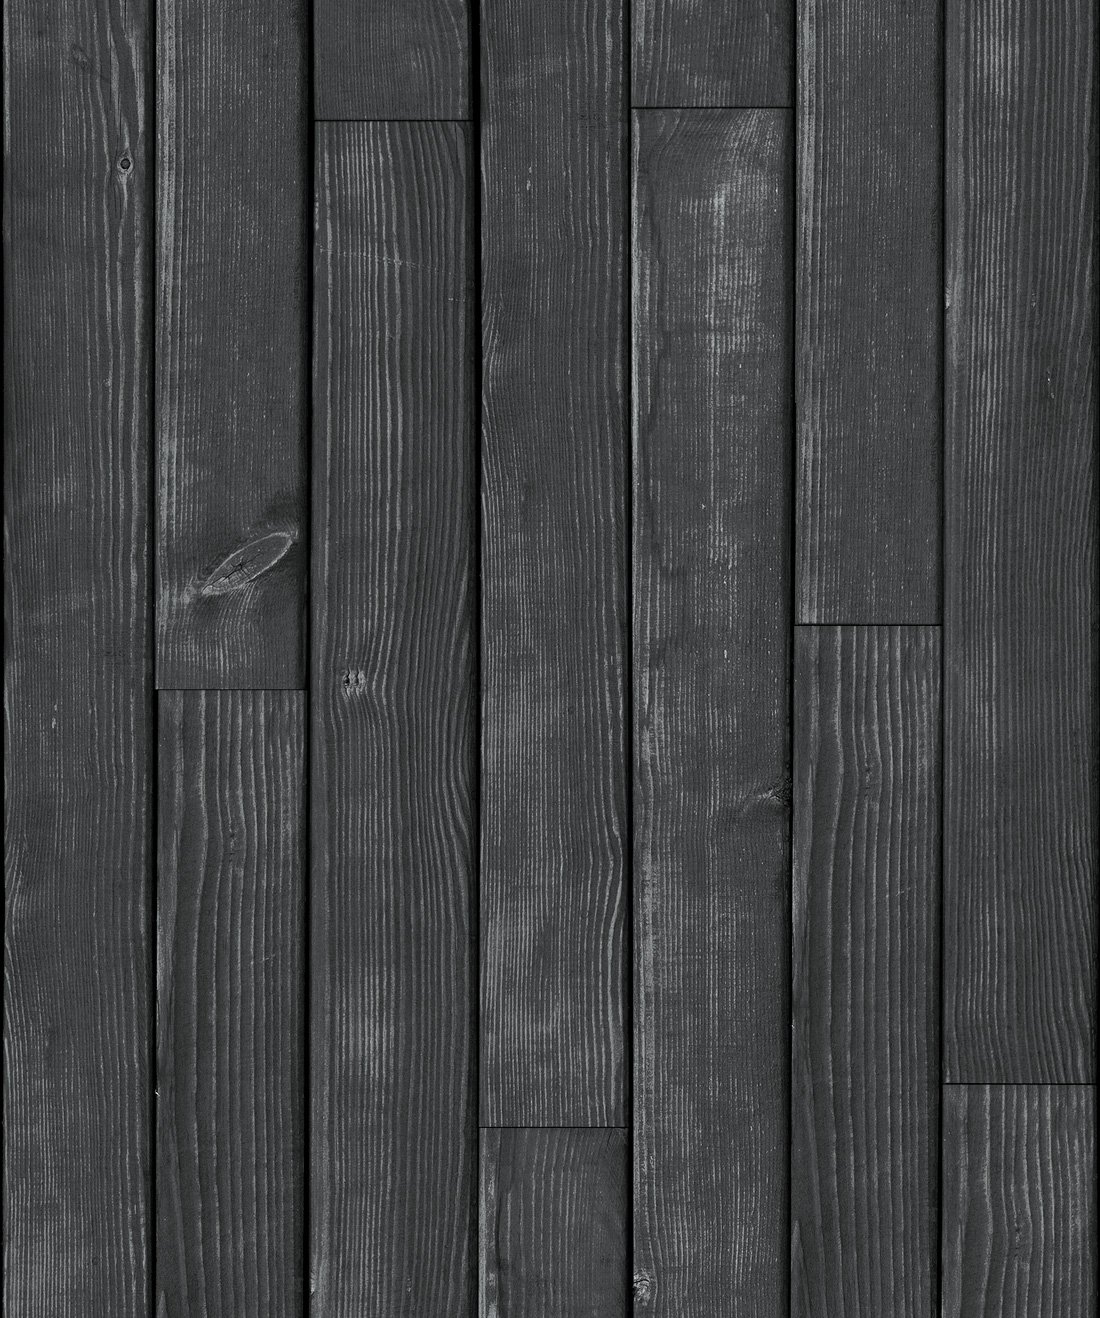 Black Wooden Boards Wallpaper • Timber Panelling